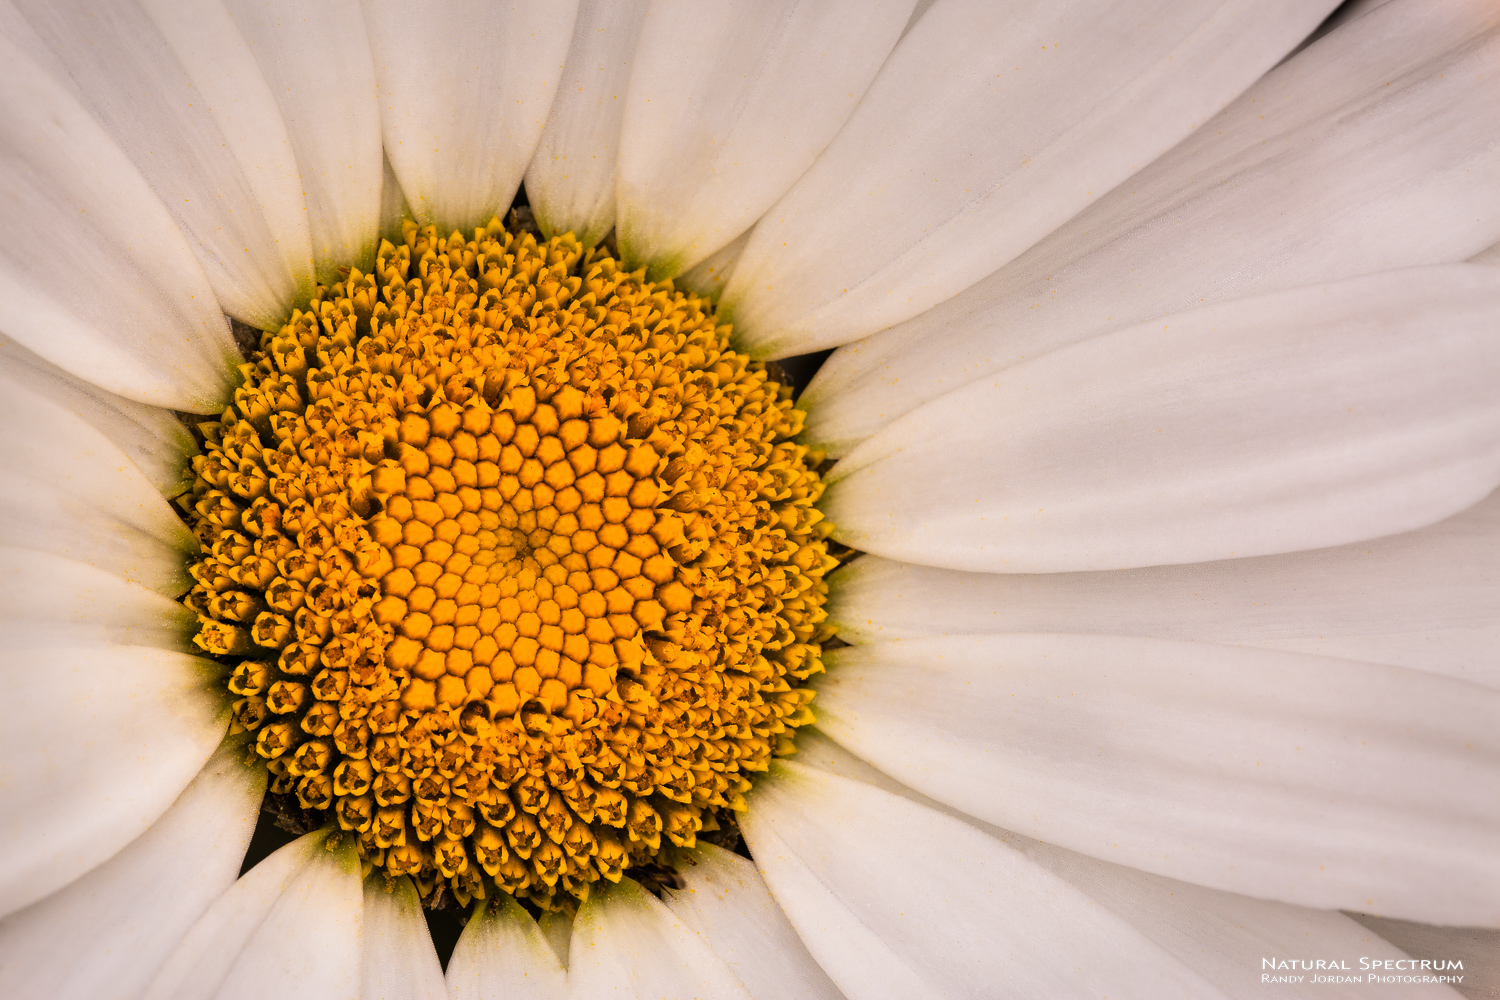 Even the most common can offer intimate expressions, such as this of a daisy on a soft light day.